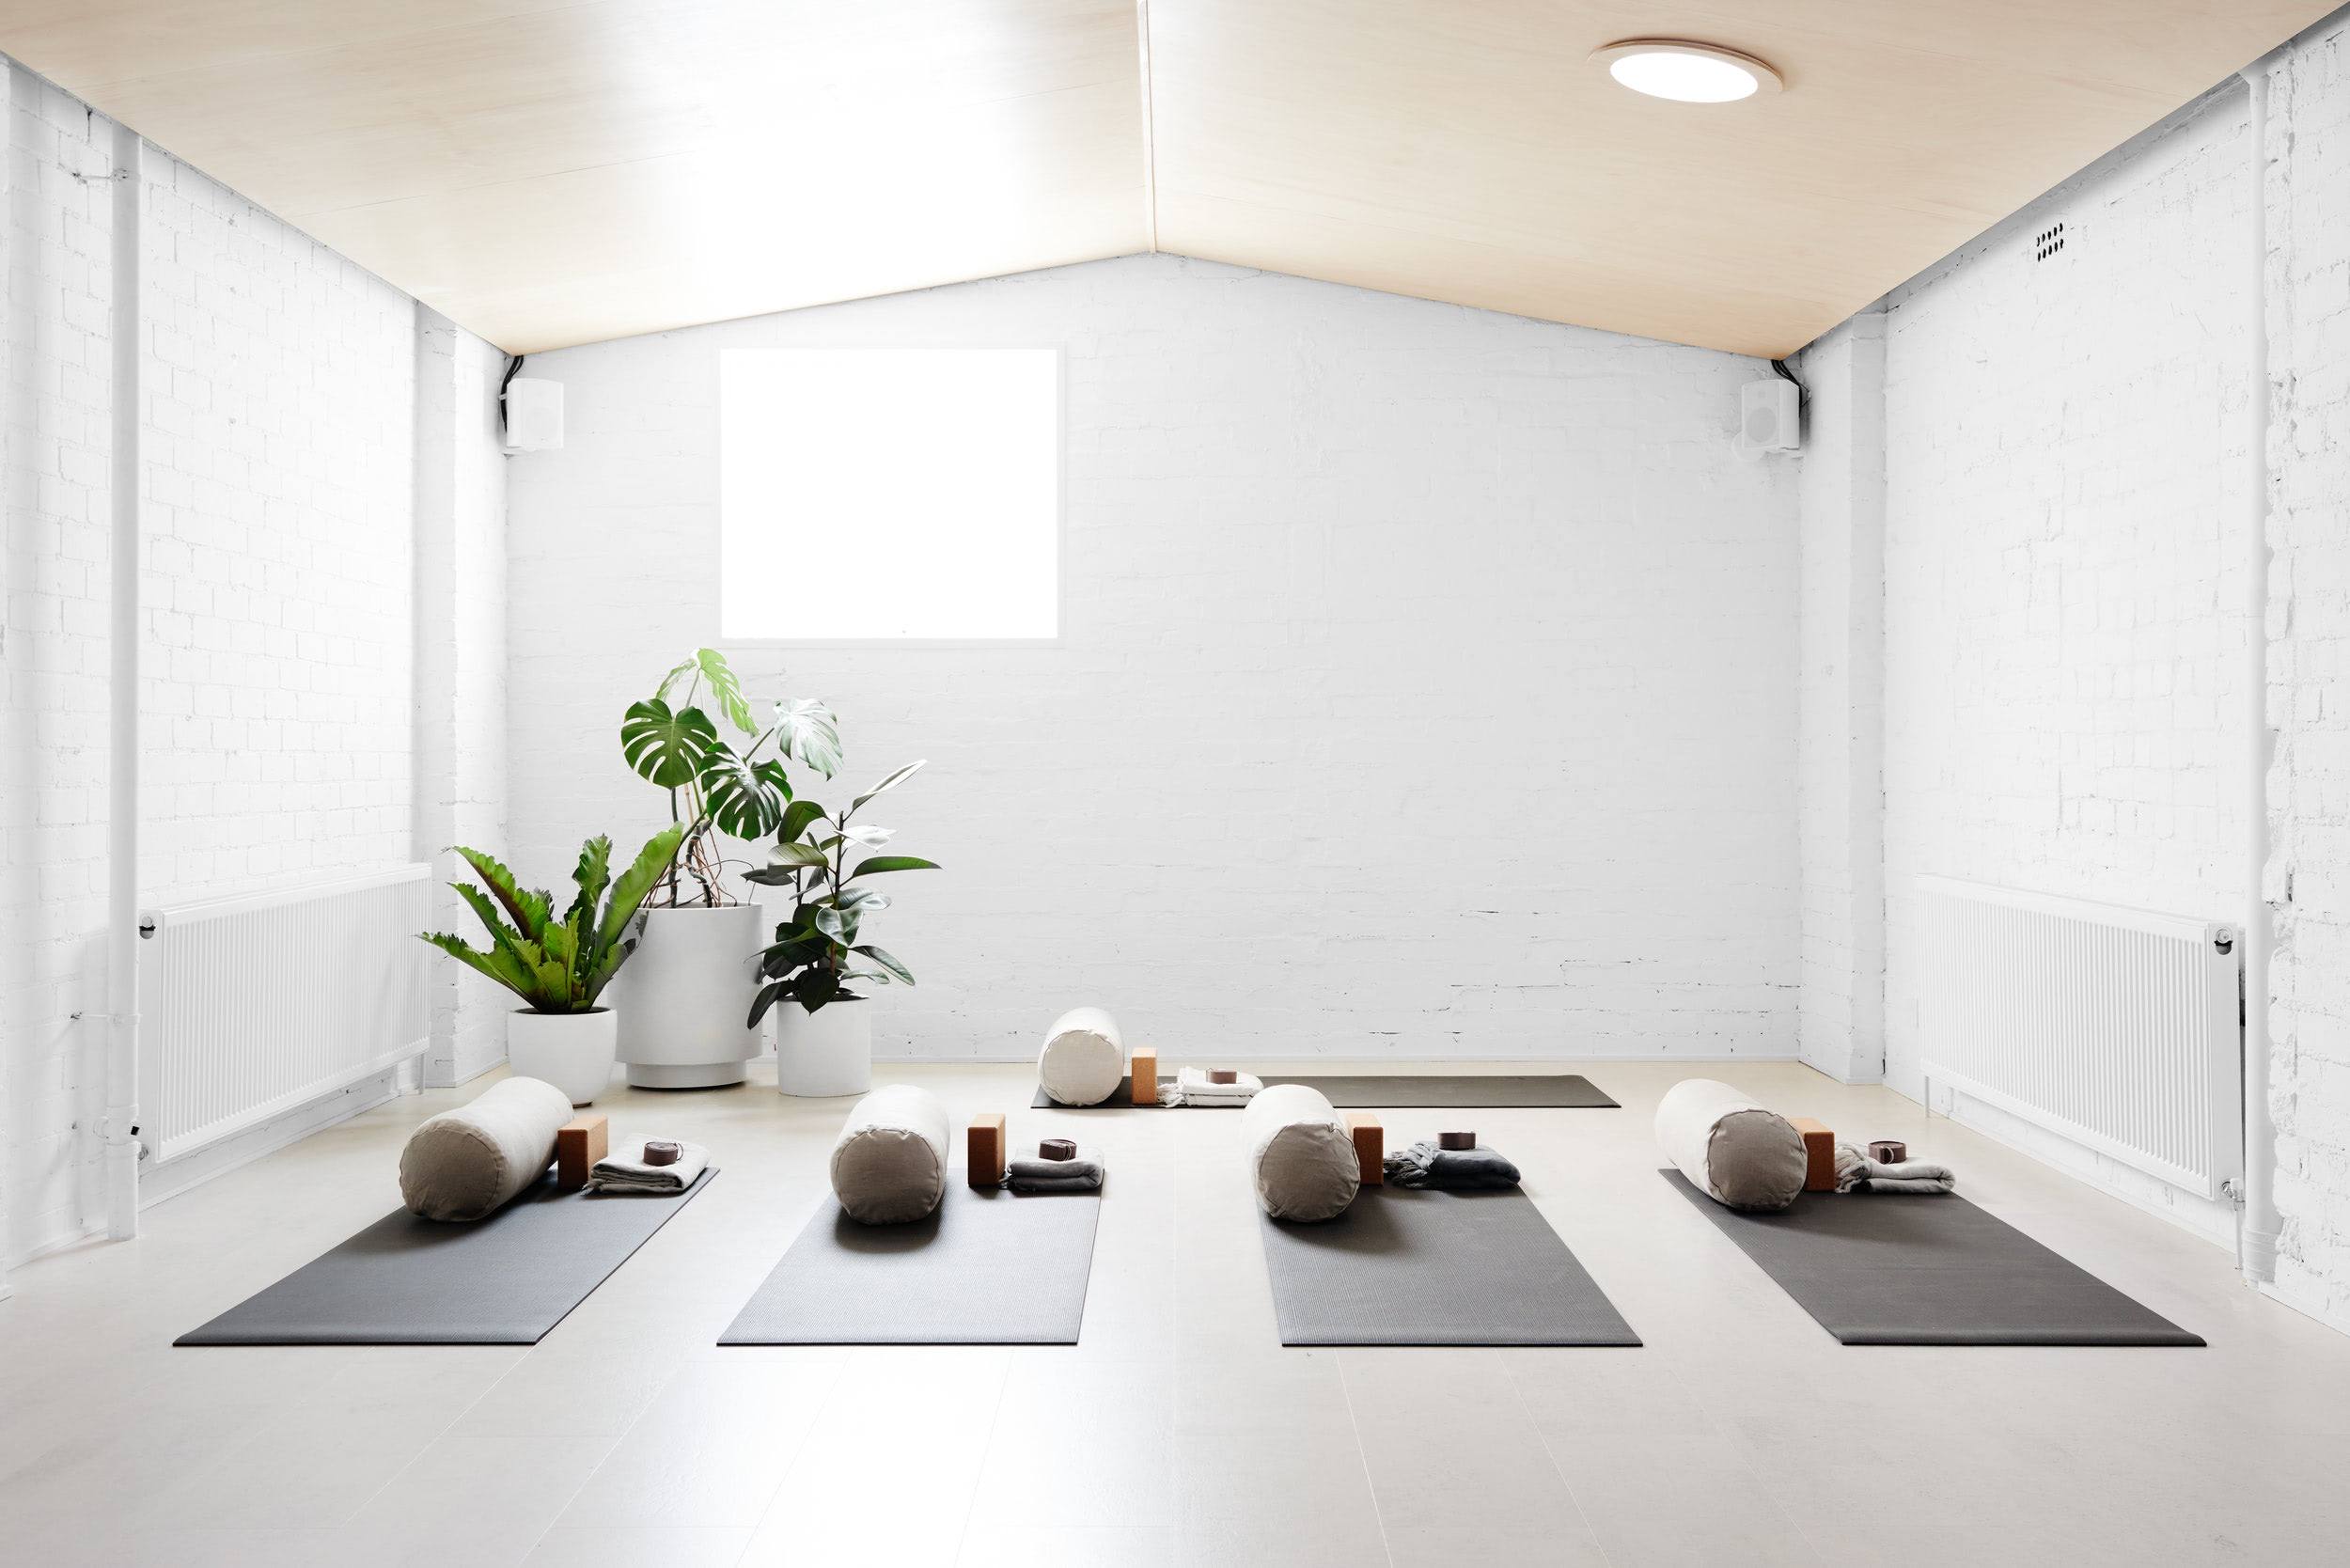 Clean and calm yoga studio with beautiful nature view. Interior